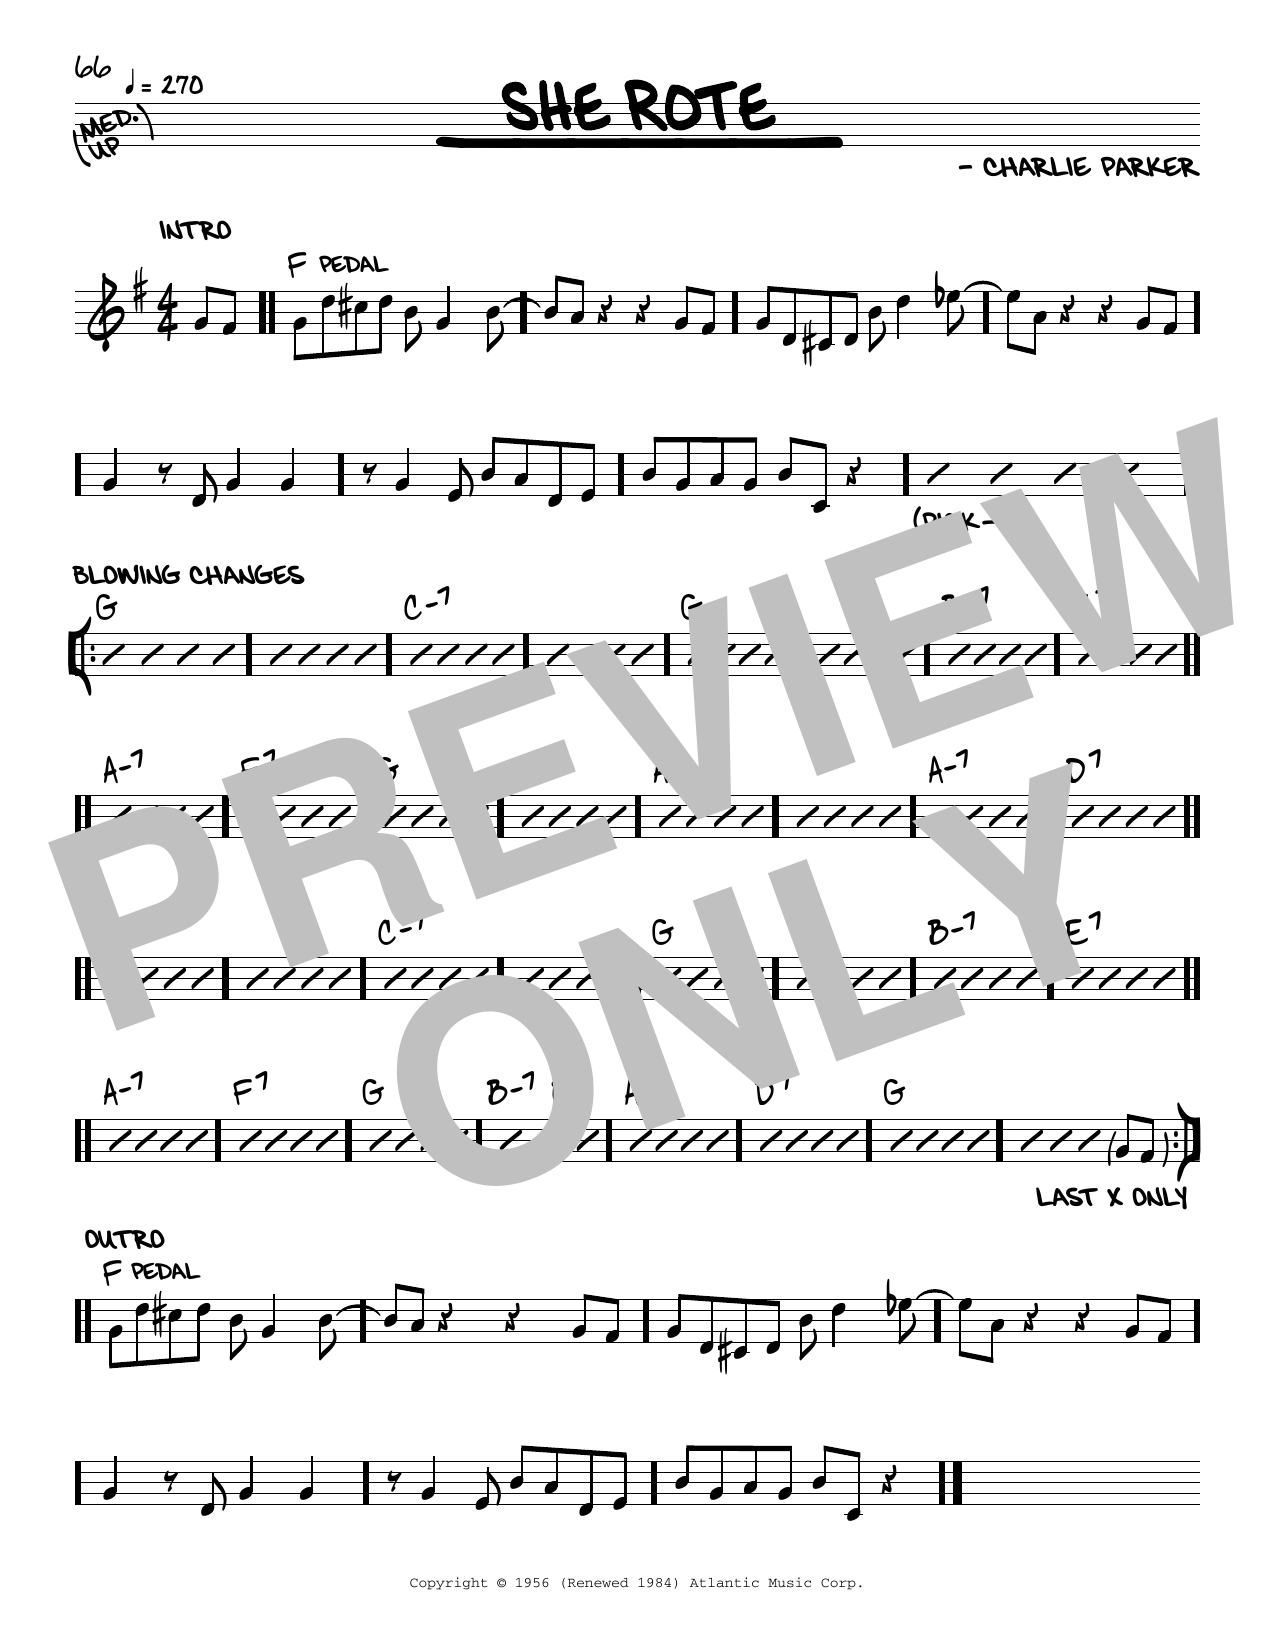 Download Charlie Parker She Rote Sheet Music